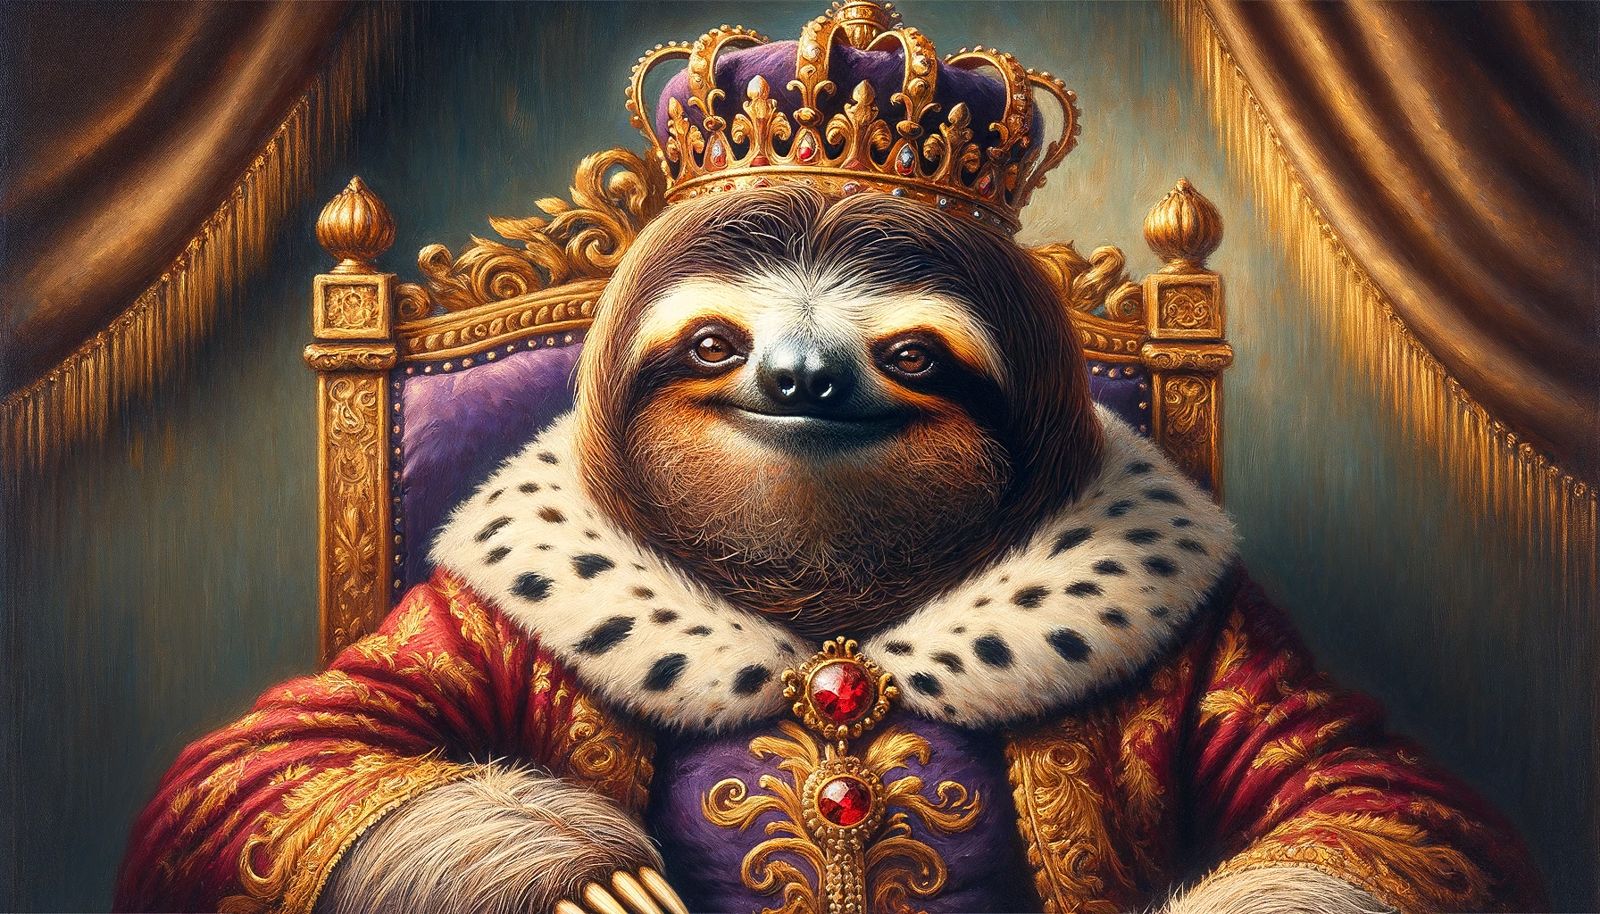 Sloth in king's costume